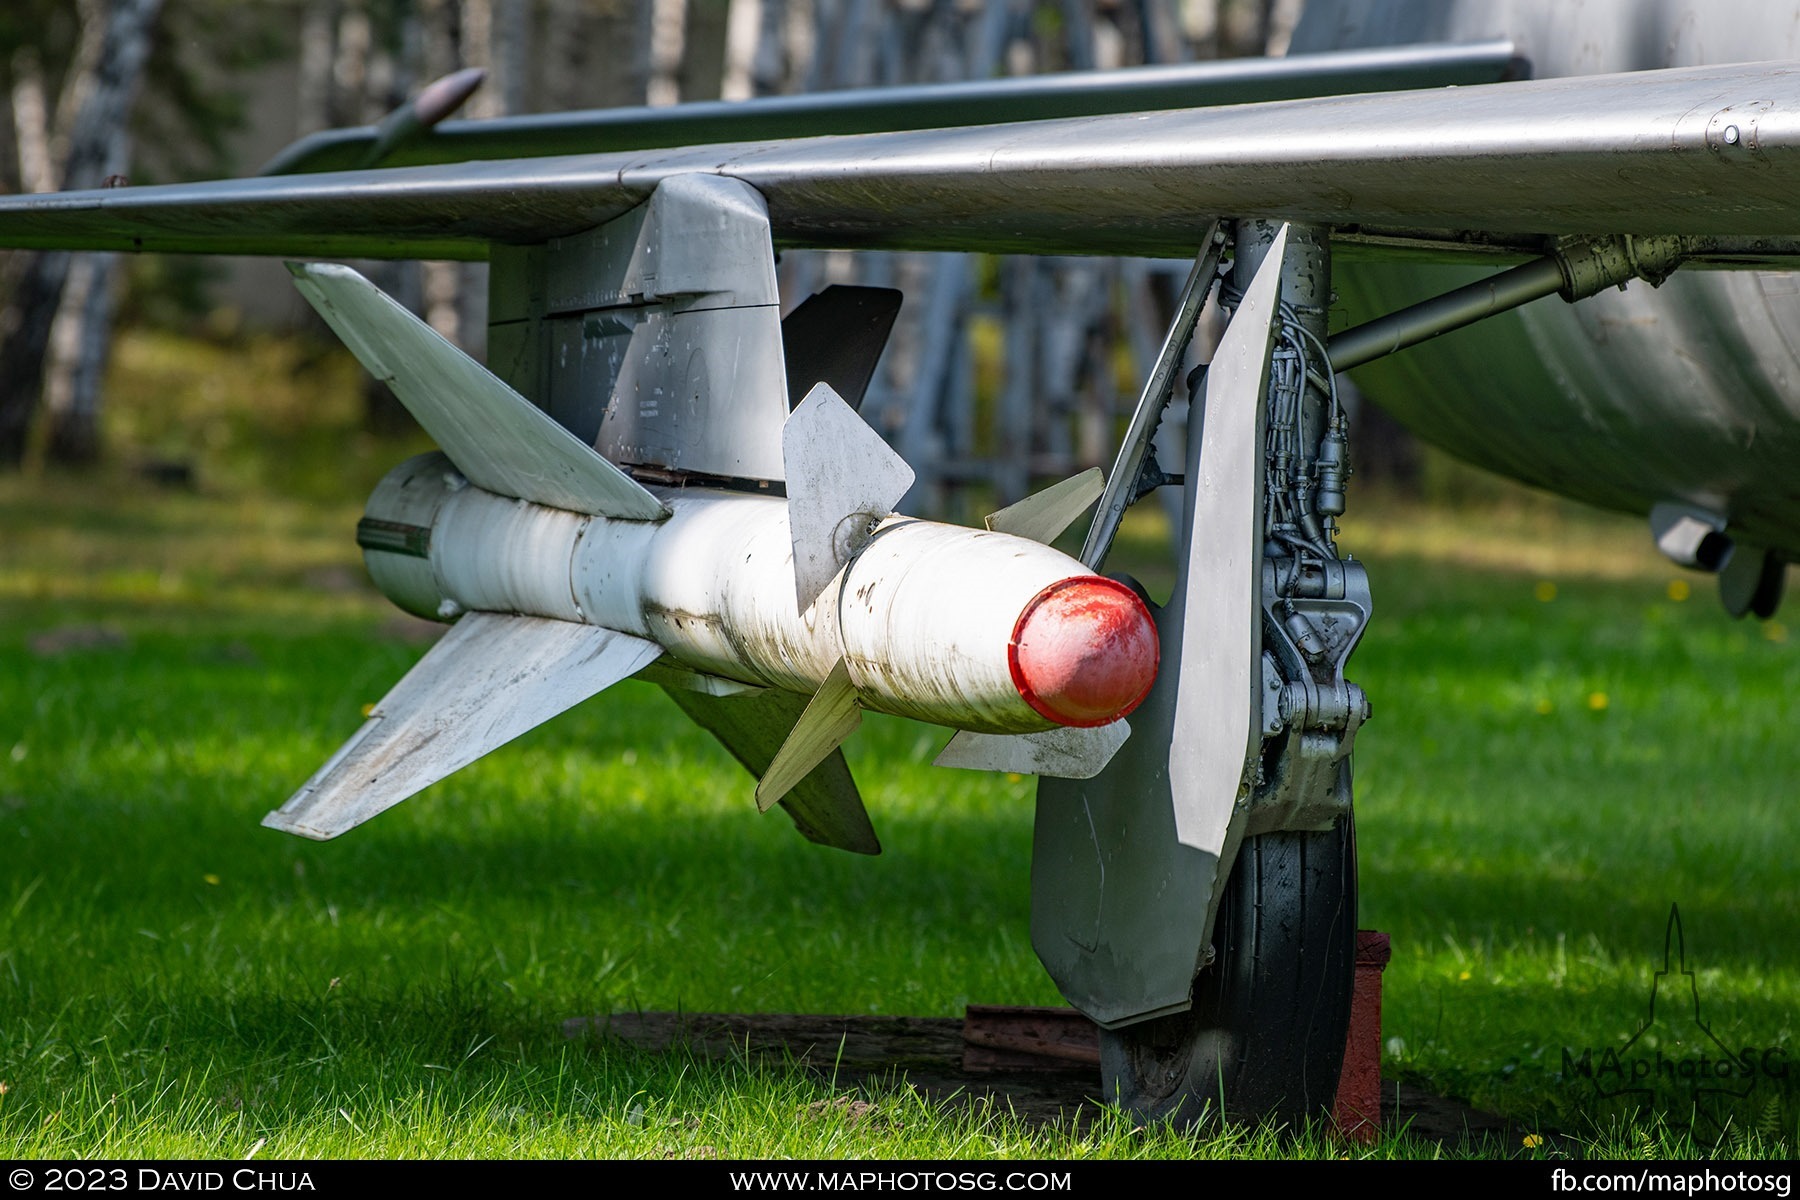 R-8 Air-to-Air missle mounted on a Sukhoi Su-15